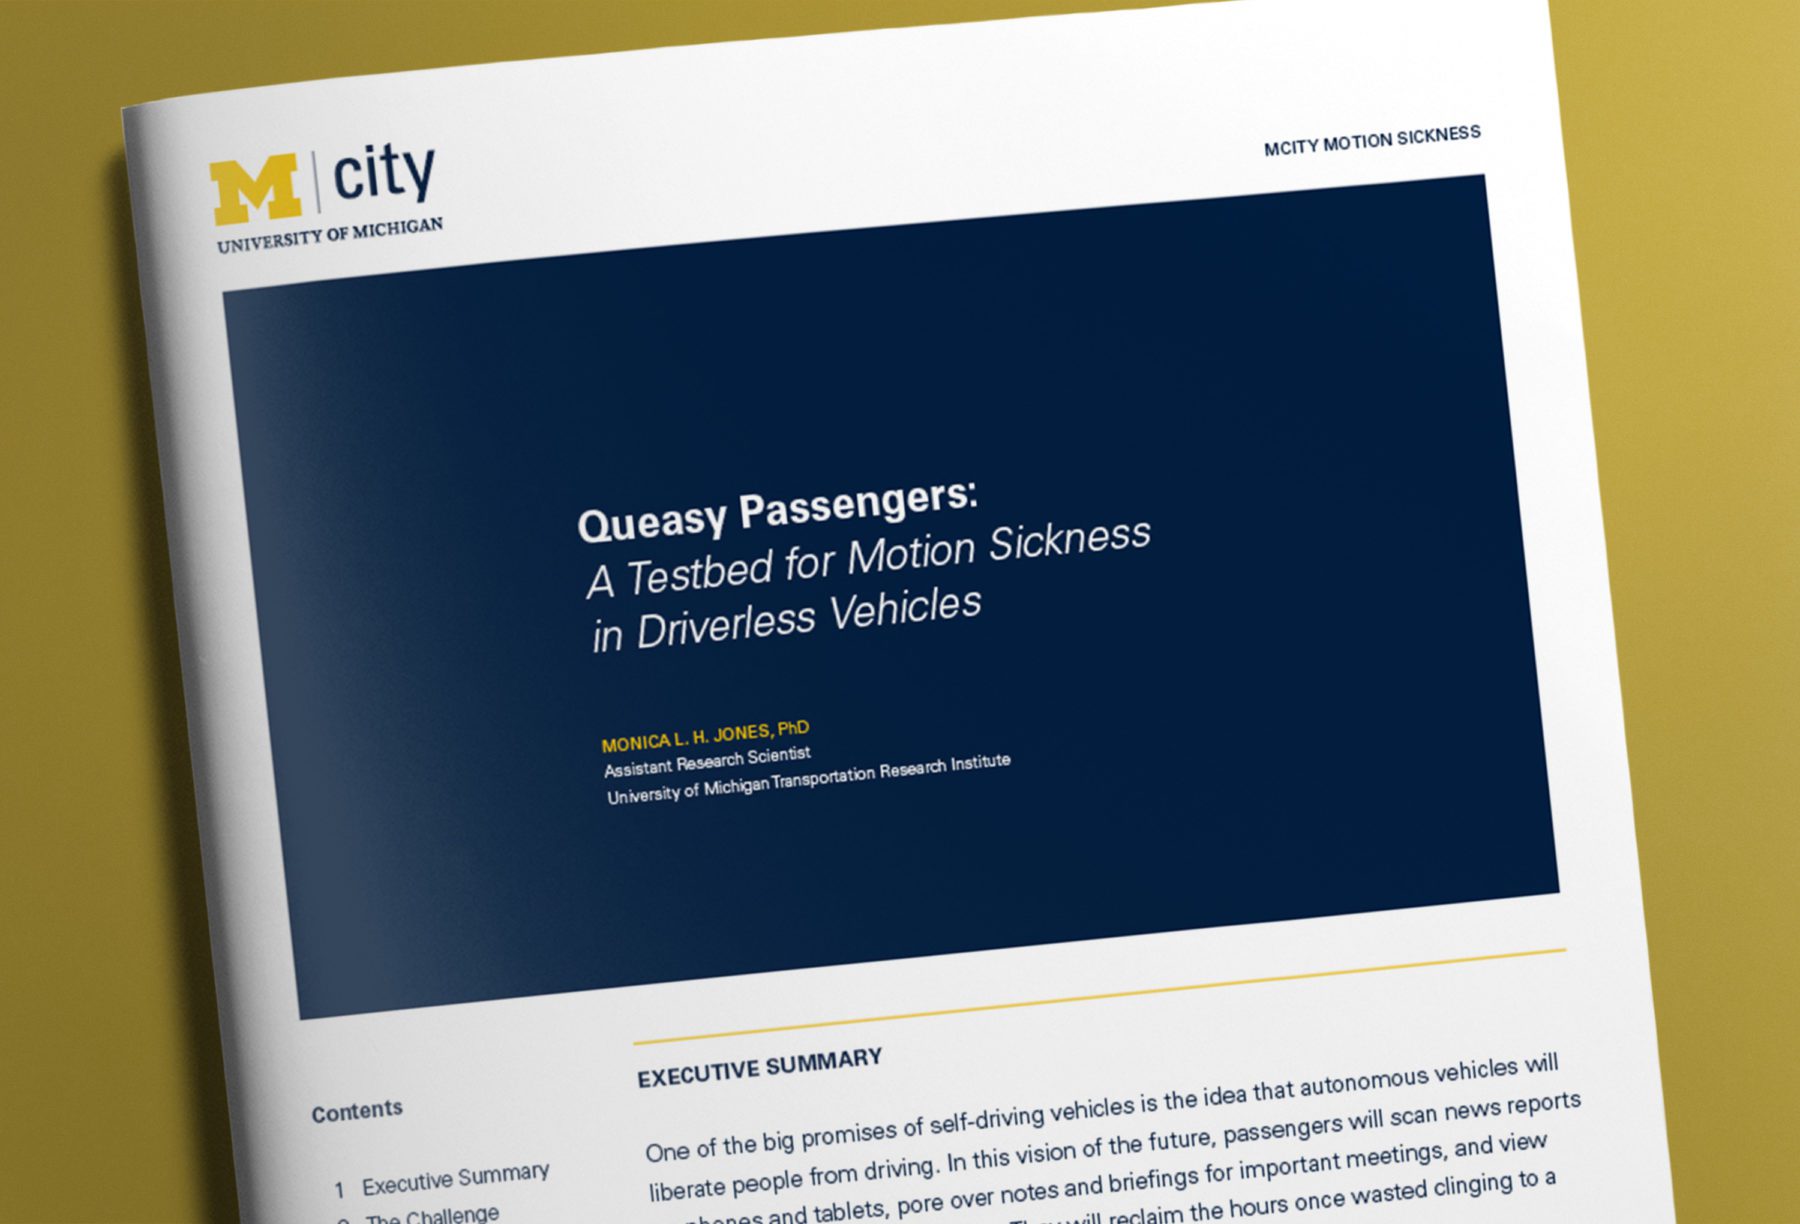 Mcity motion sickness white paper cover